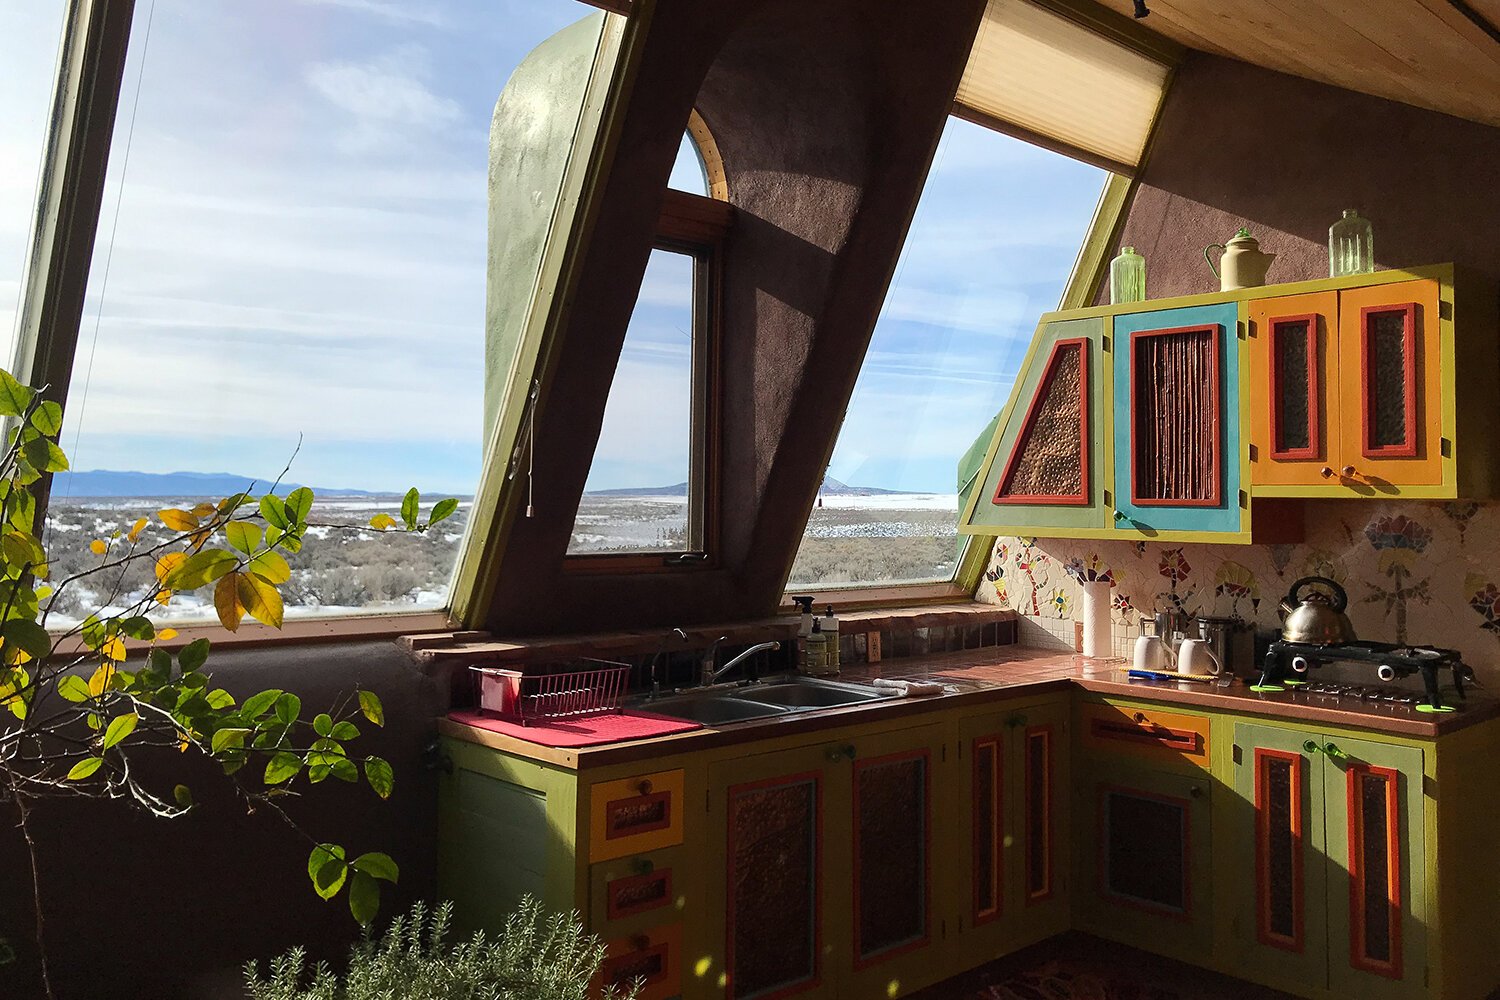 Travels and Curiosities - Earthships NM